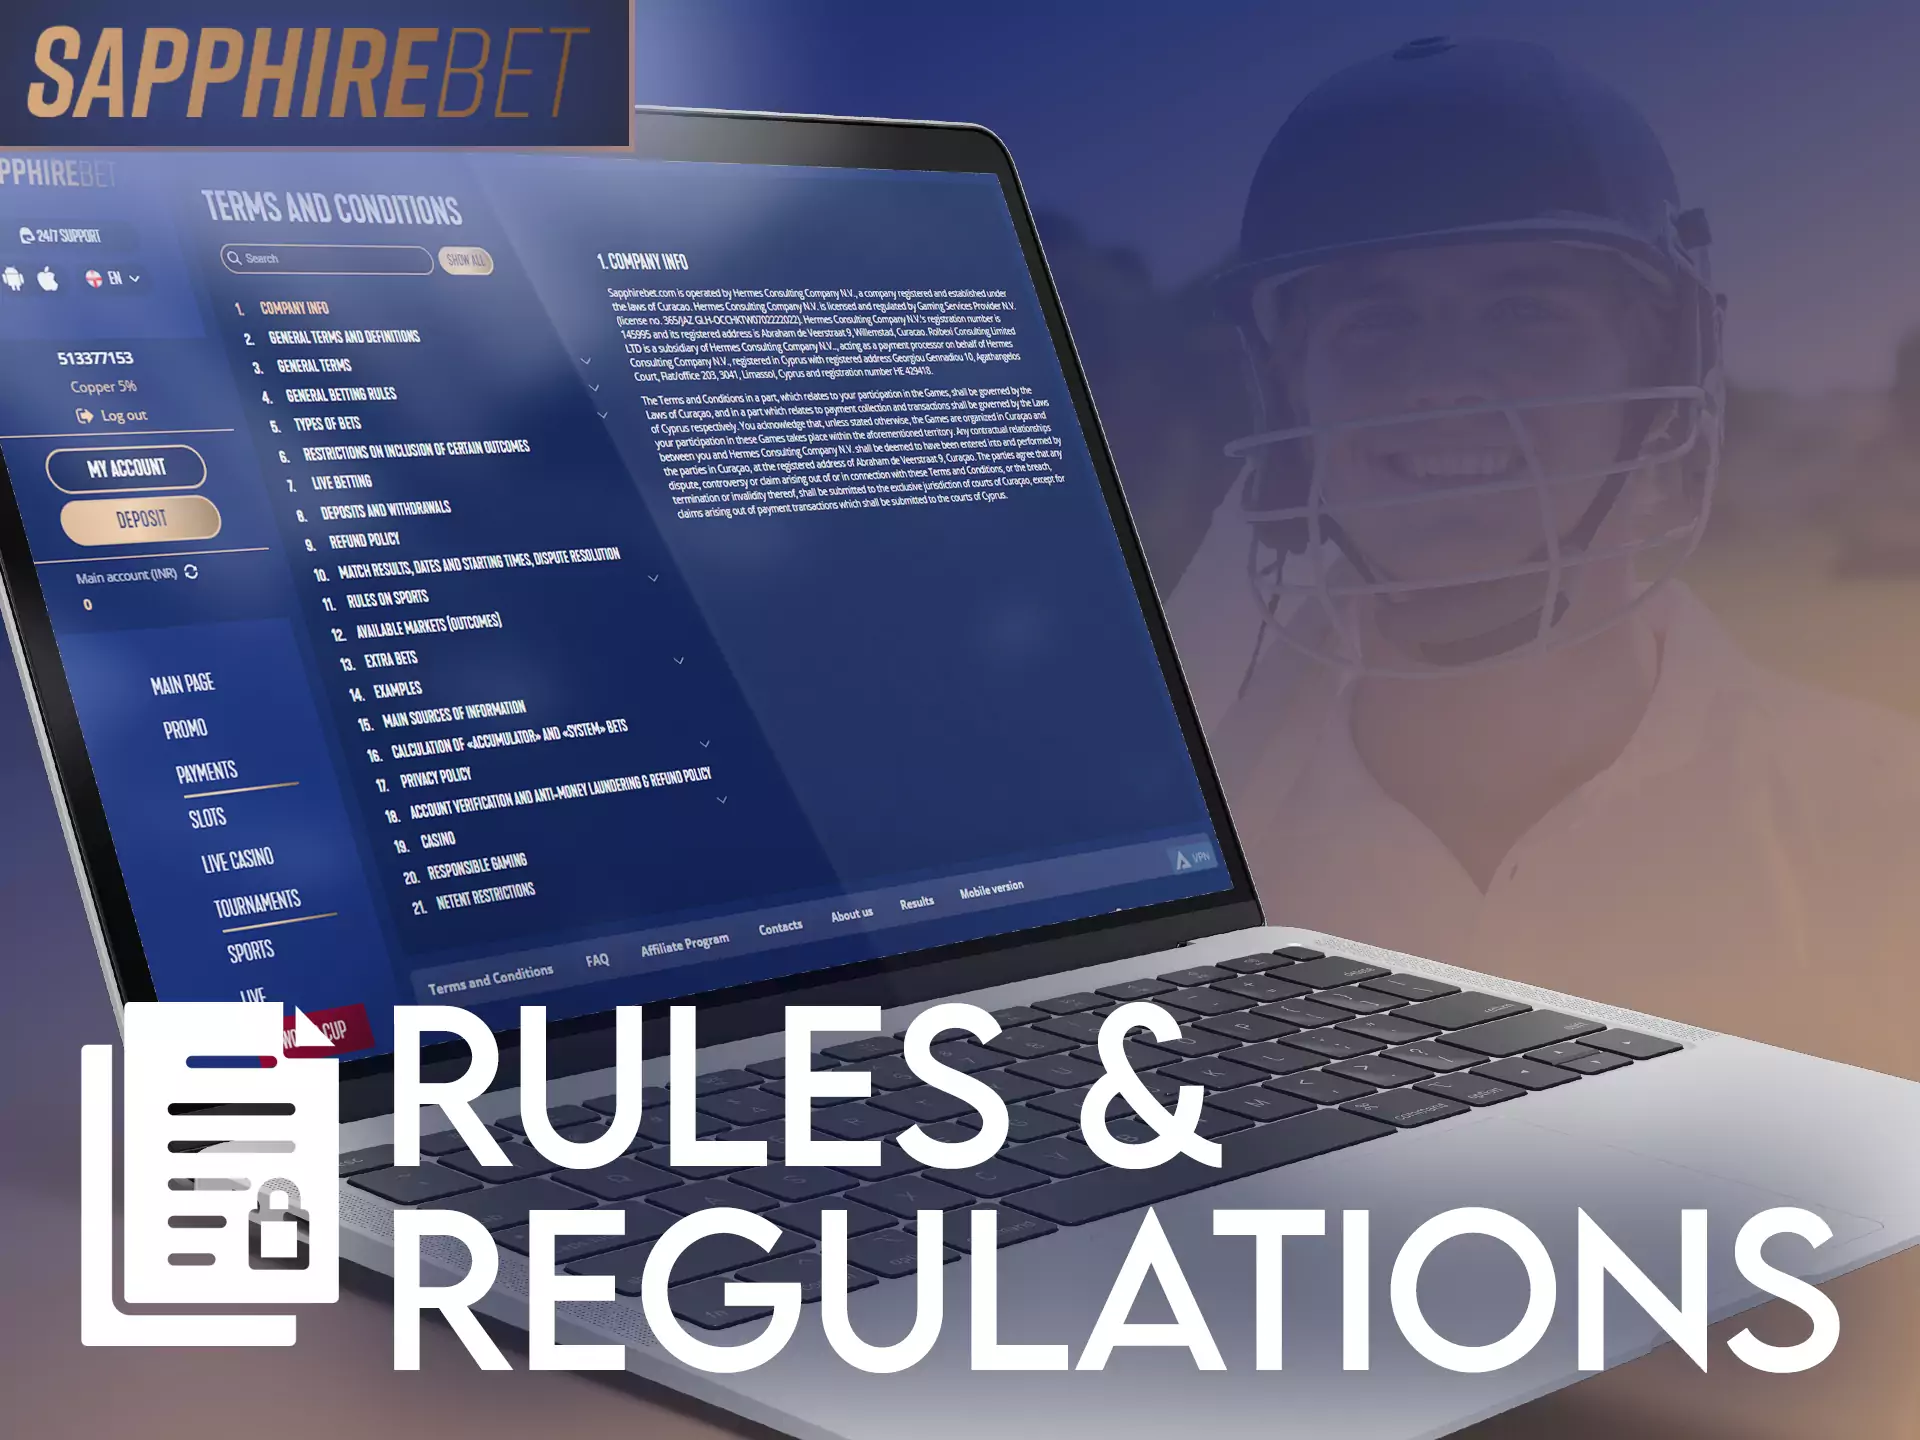 Learn the rules and regulations of Sapphirebet, use the service comfortably.